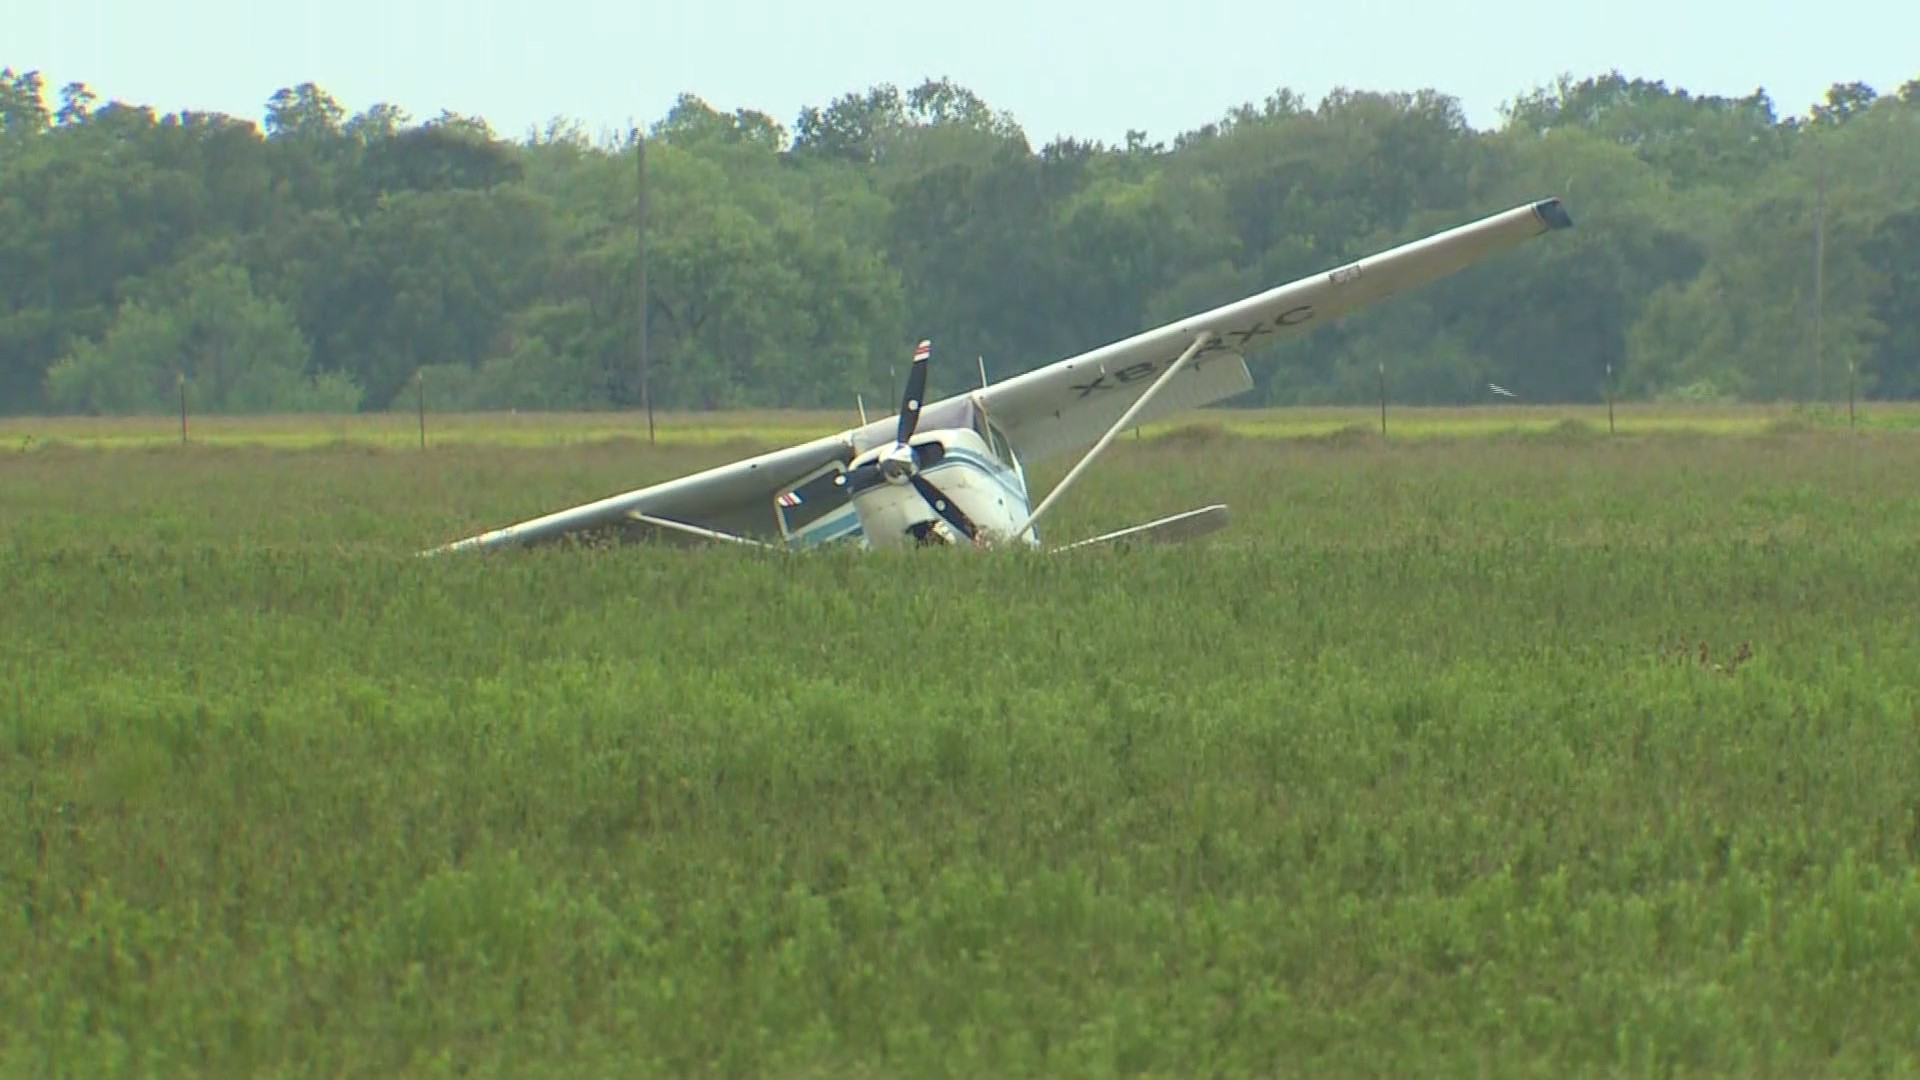 A small plane crashed near Beasley in Fort Bend County Thursday evening, according to the county sheriff's office.